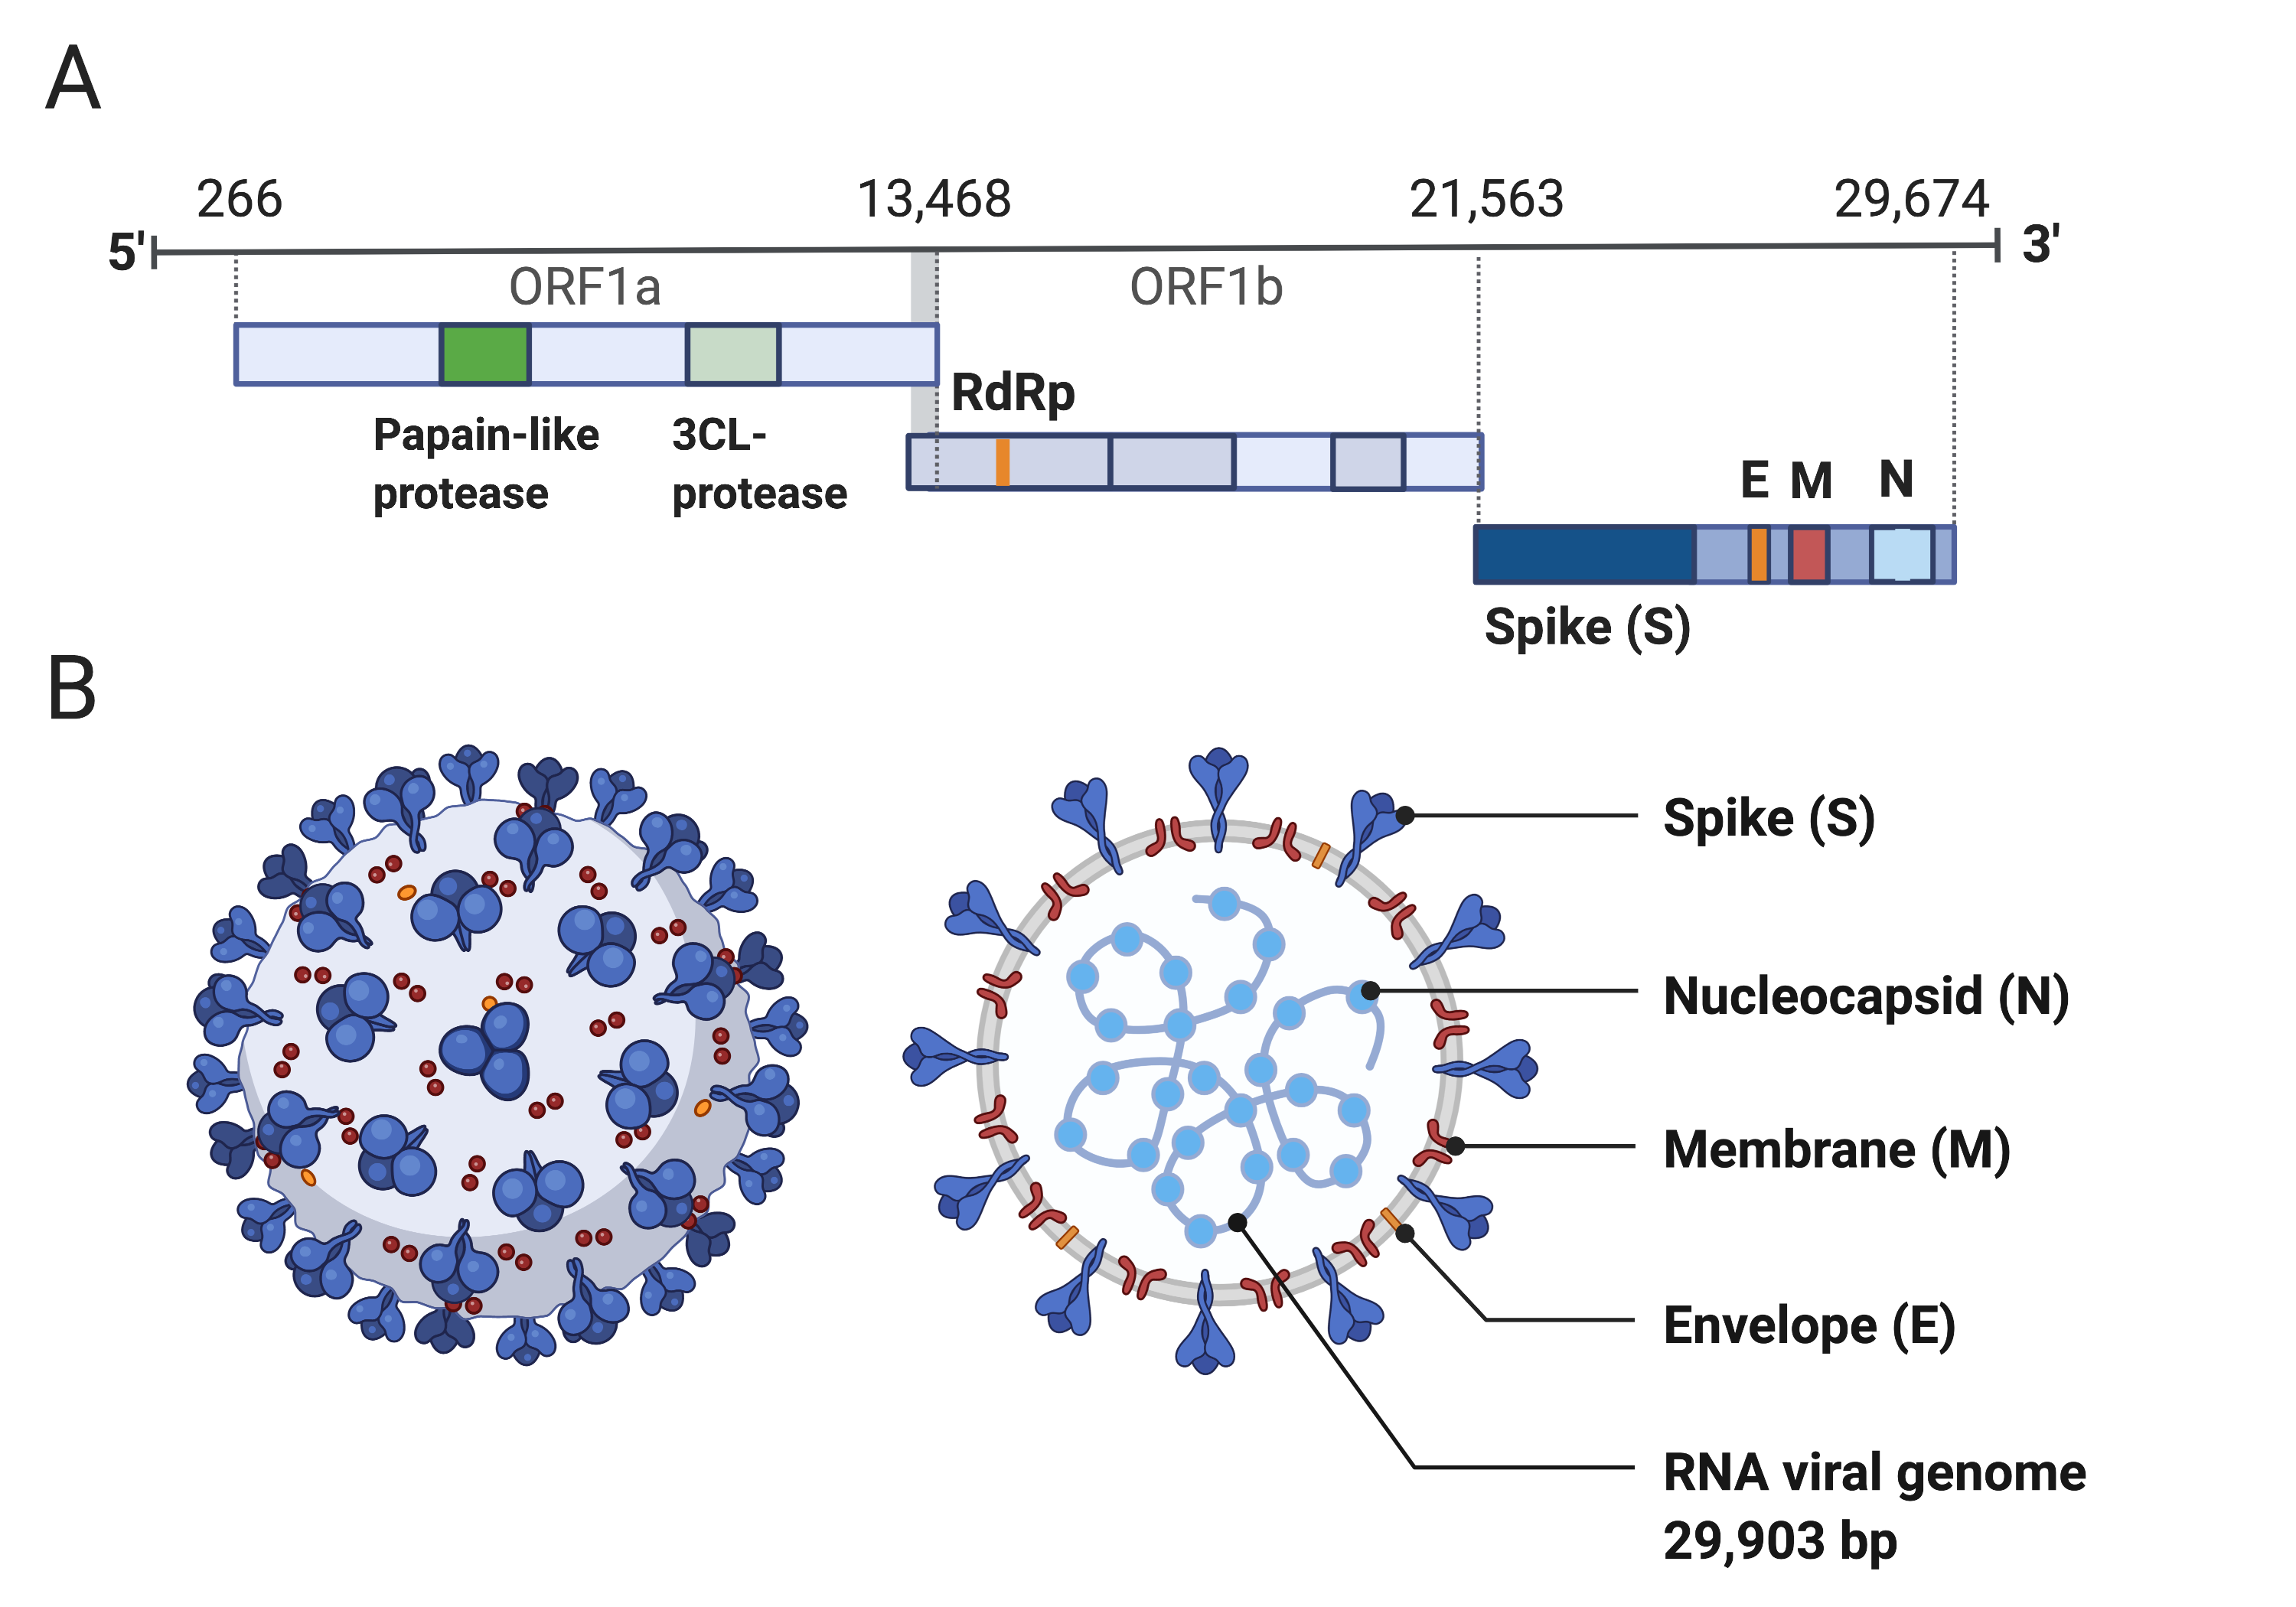 Figure 1: Structure of SARS-CoV-2 capsid and genome. A) The genomic structure of coronaviruses is highly conserved and includes three main regions. Open reading frames (ORF) 1a and 1b contain two polyproteins that encode the non-structural proteins (nsp). The nsp include enzymes such as RNA-dependent RNA Polymerase (RdRp). The last third of the genome encodes structural proteins, including the spike (S), envelope (E), membrane (M) and nucleocapsid (N) proteins. Accessory genes can also be interspersed throughout the genome [16]. B) The physical structure of the coronavirus virion, including the components determined by the conserved structural proteins S, E, M and N. This figure was adapted from “Human Coronavirus Structure”, by BioRender.com (2020), retrieved from https://app.biorender.com/biorender-templates.